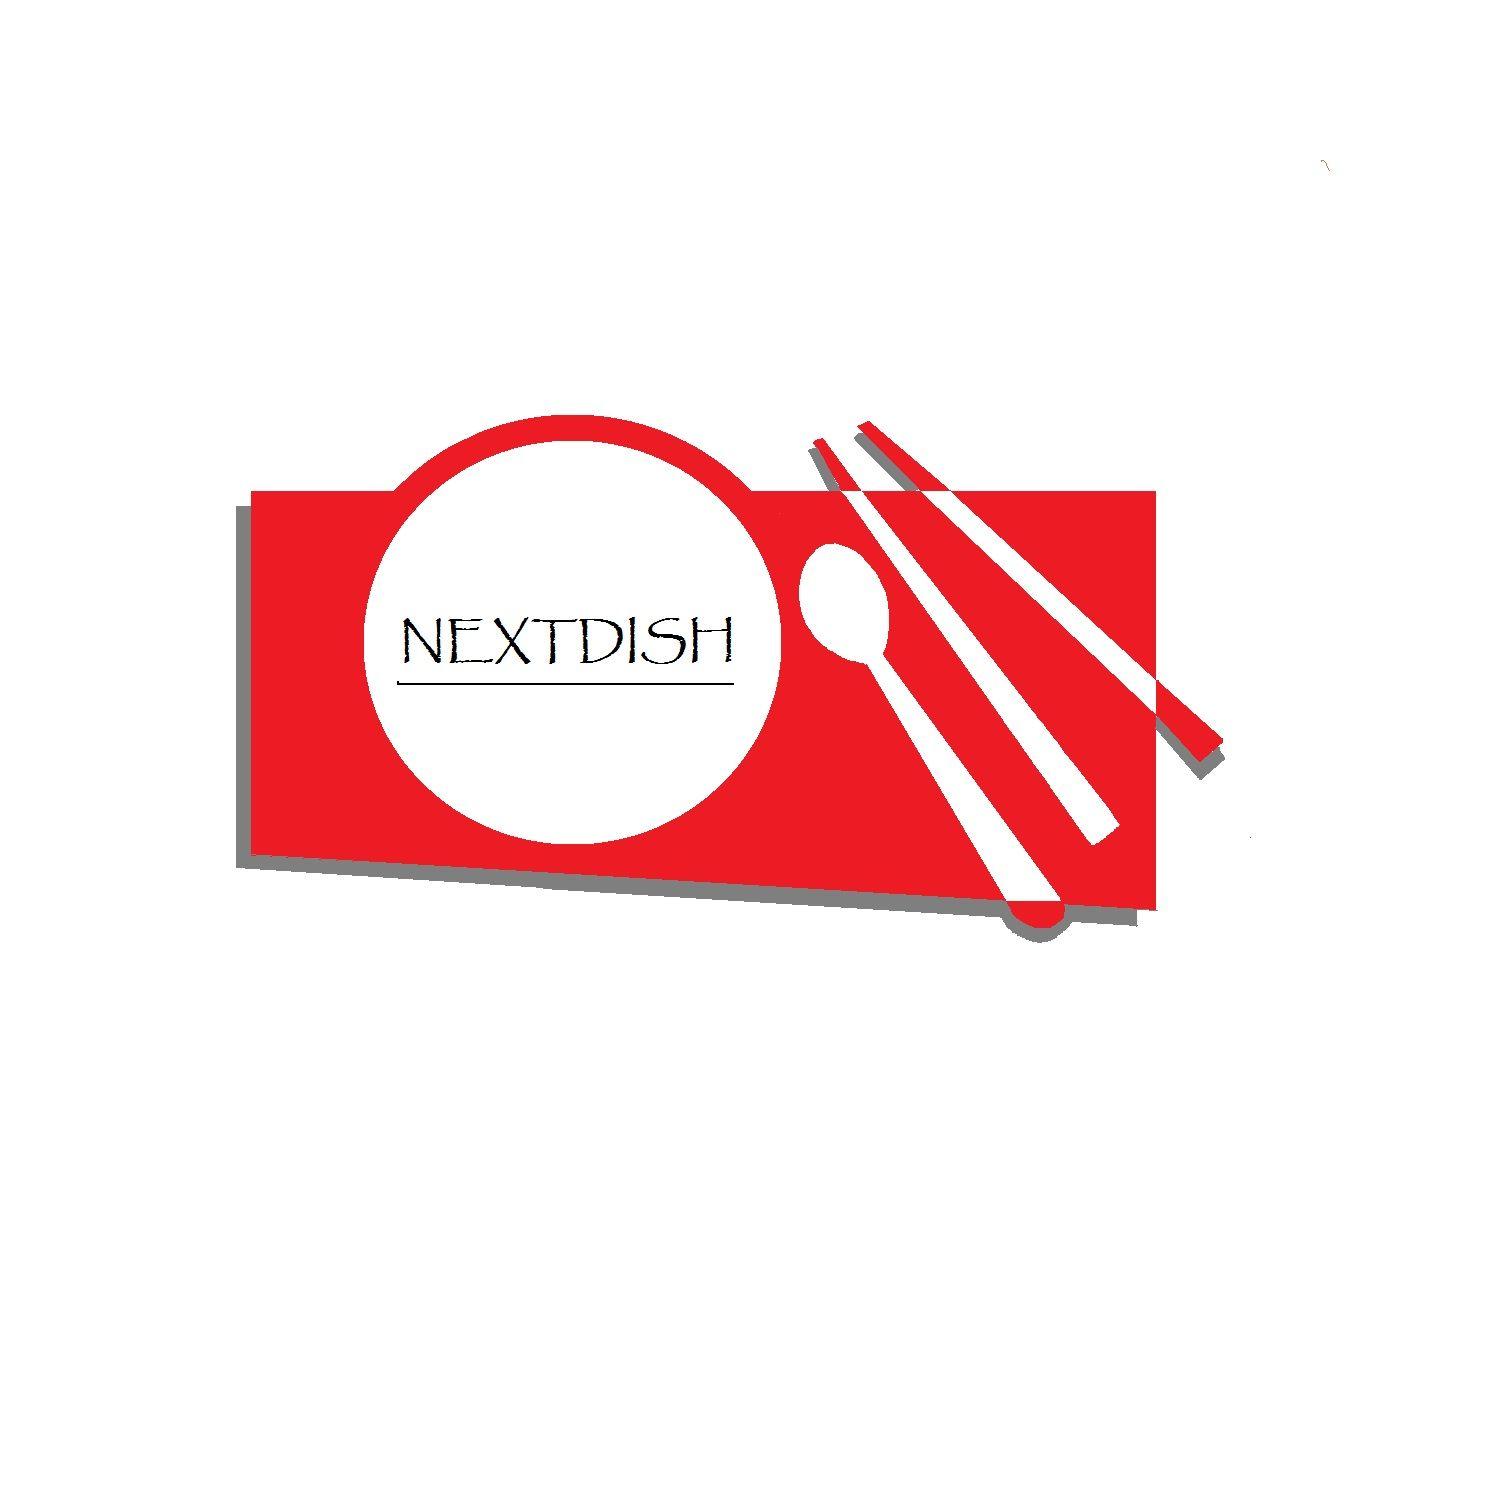 Two Words Red Logo - Conservative, Feminine, Delivery Service Logo Design for Nextdish ...